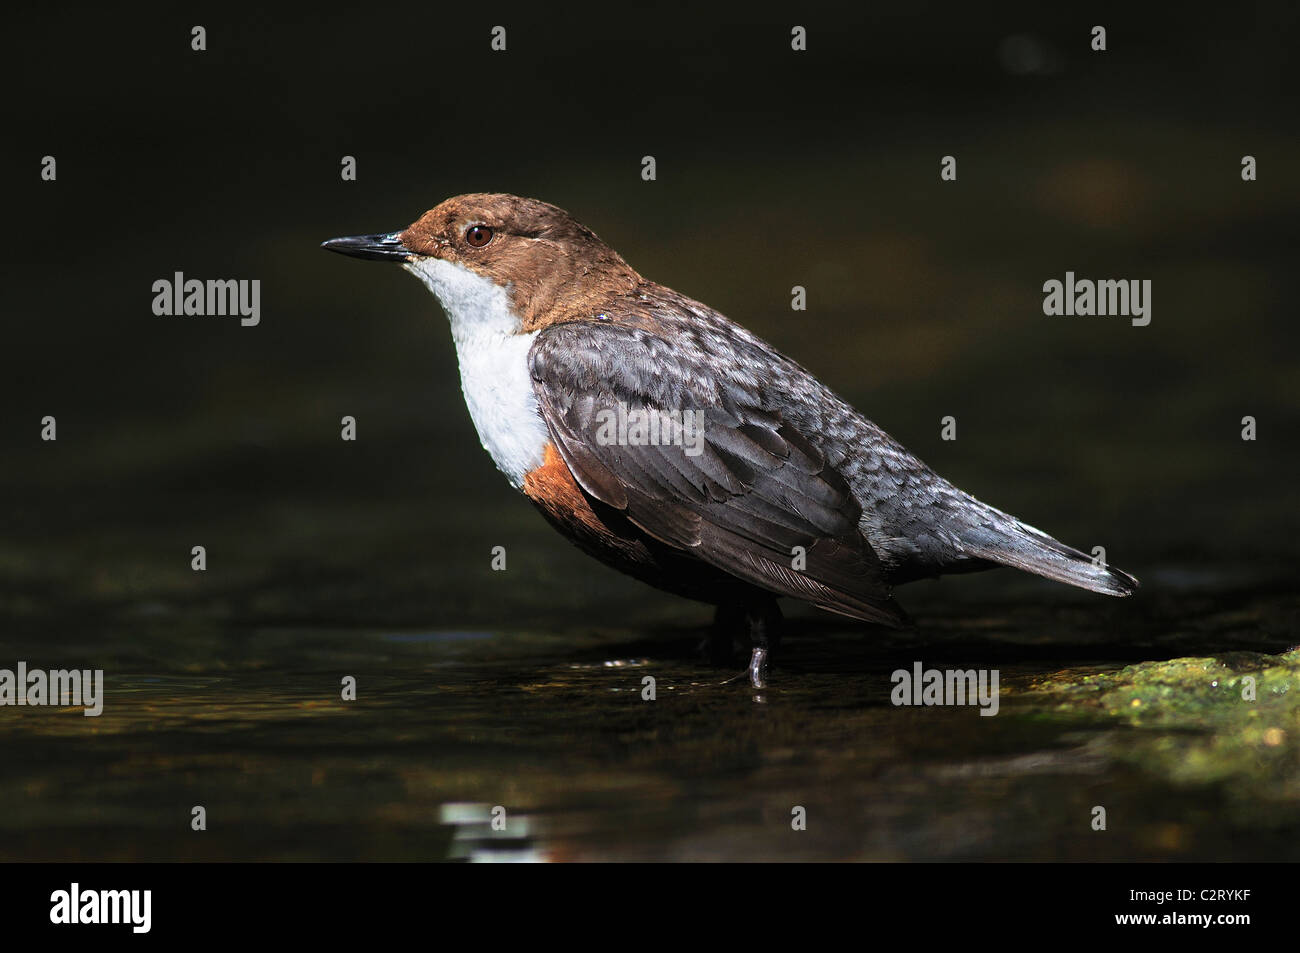 A dipper (Cinclus c. gularis) standing on a stone in a river. Dorset, UK May 2010 Stock Photo